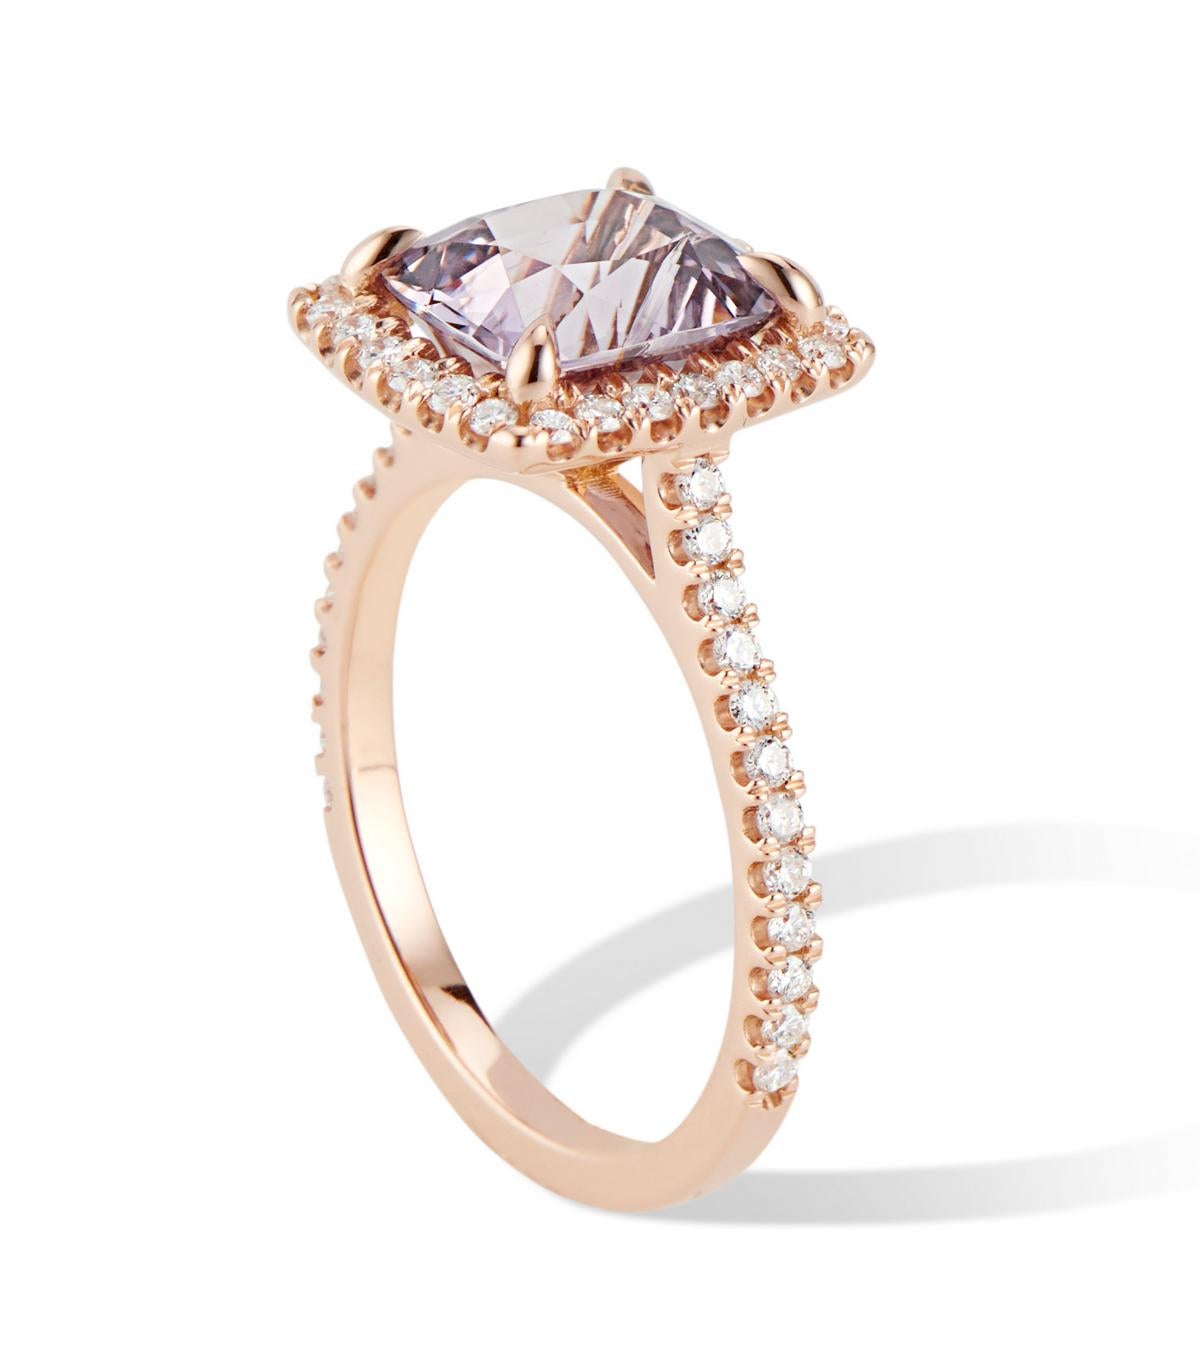 3.03 tcw. Lavender Spinel surrounding by a halo of scintillating VS quality diamonds. 
The diamond setting is handmade, adding to the quality details of this piece. 
The Sparkle and Dance of the gemstones complement the soft hue of the high polish